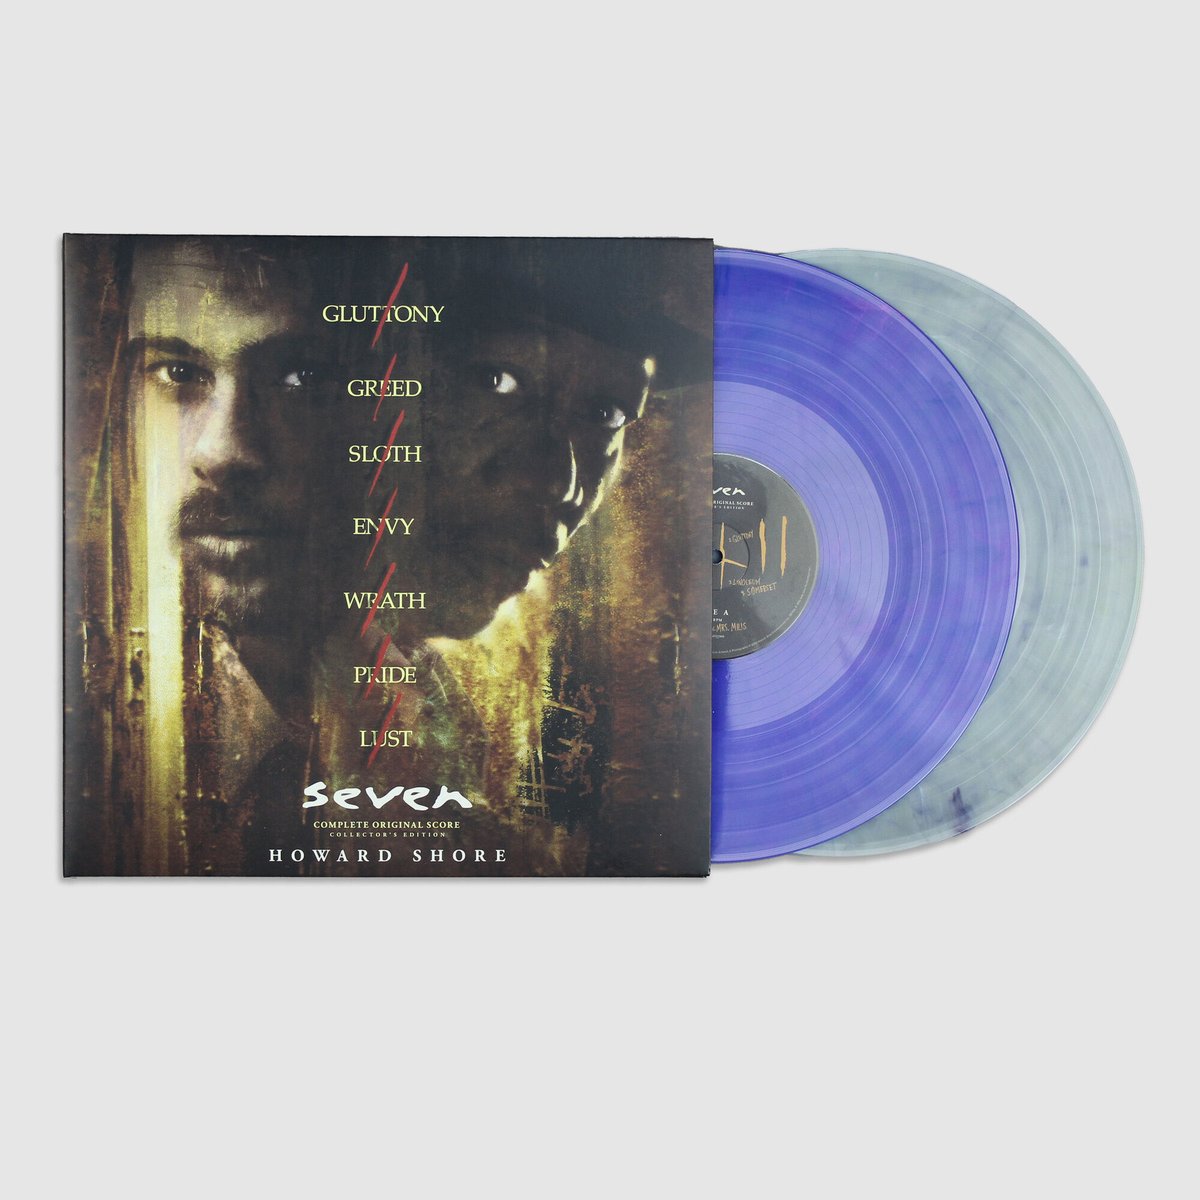 babes, are you ok? You haven’t played your Howard Shore SE7EN - Original Motion Picture Score - Vinyl 2×LP, Limited Coloured 'Lust & Sloth' Coloured Vinyl (£54.99) - I thought you loved that film?